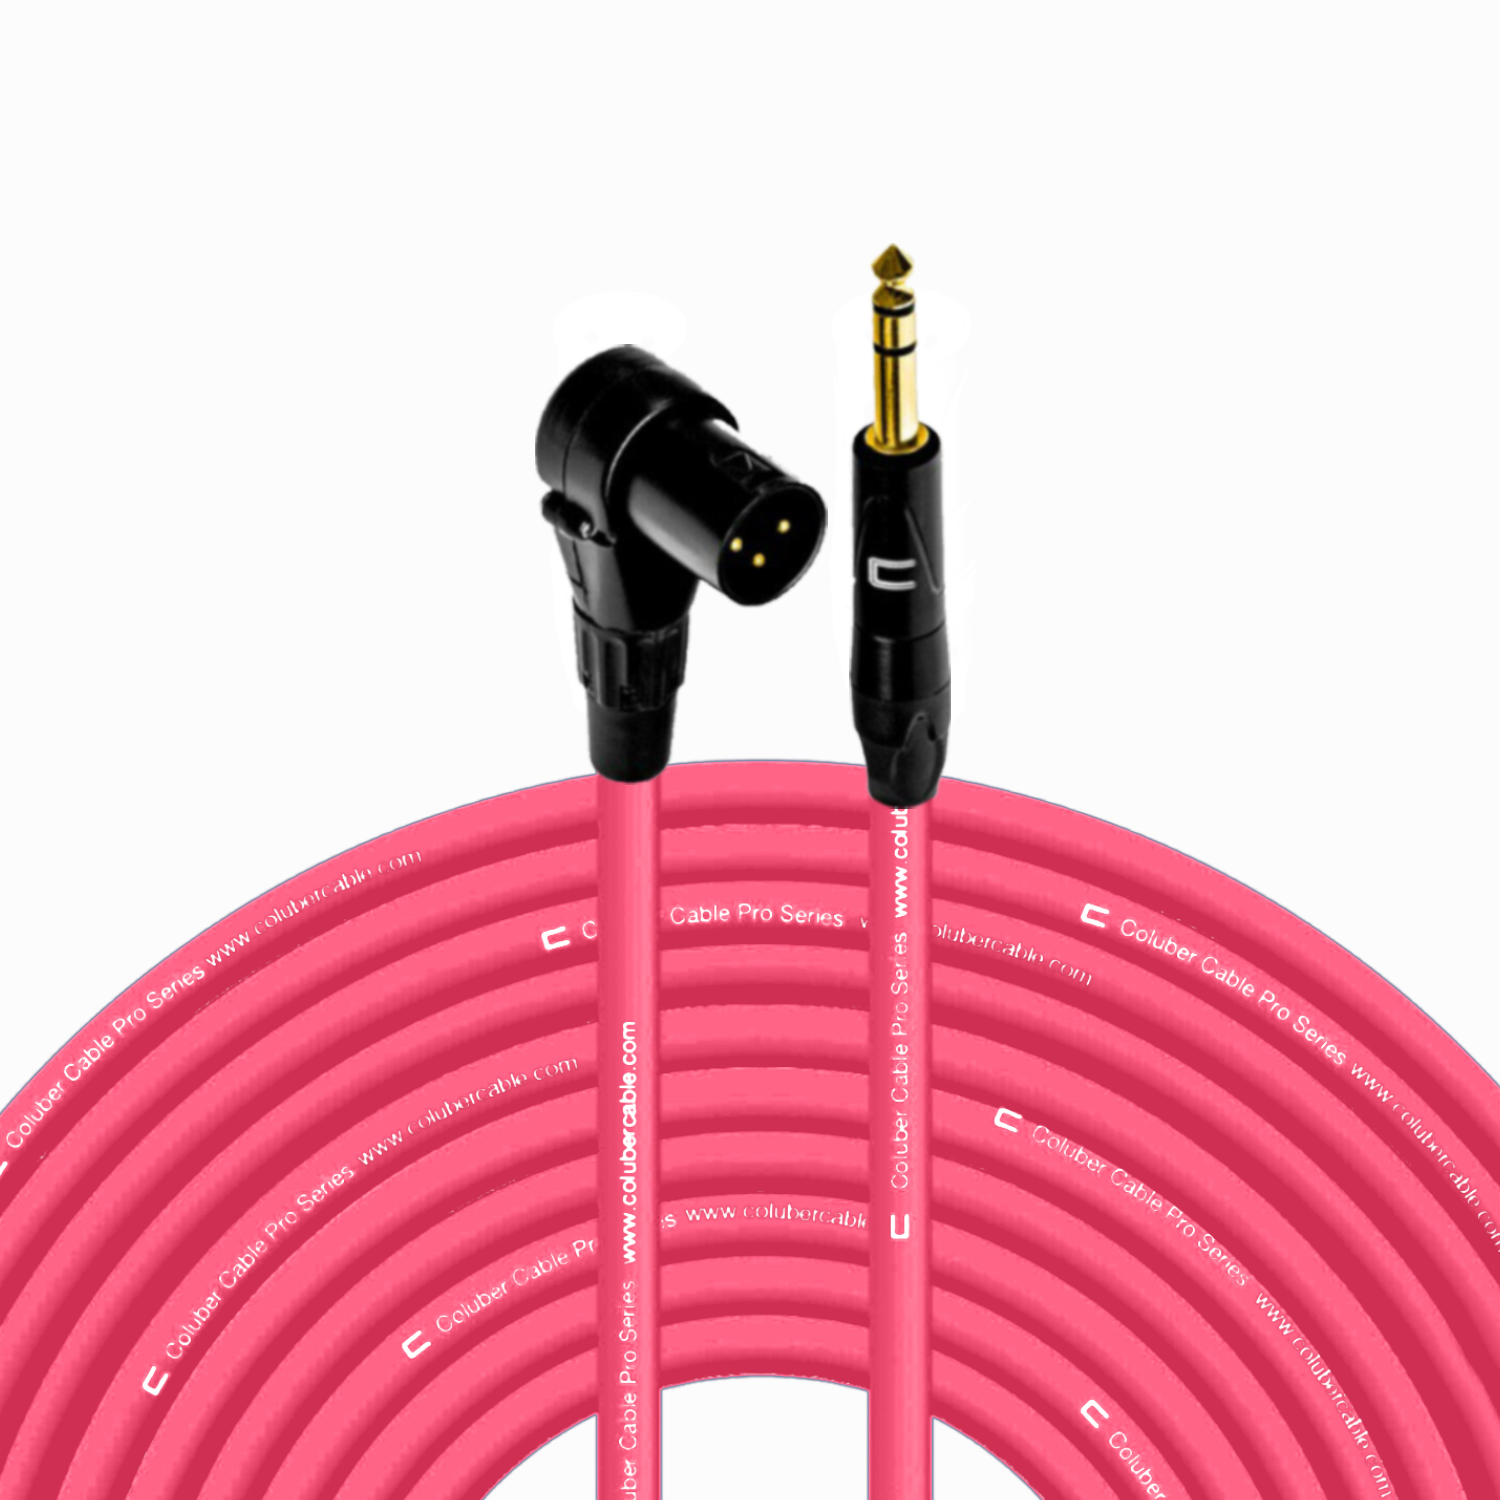 Right Angle XLR Male to 1/4" TRS Male - 100 Feet - Pink - Pro 3-Pin Microphone Connector for Powered Speakers, Audio Interface or Mixer for Live Performance & Recording - image 1 of 7